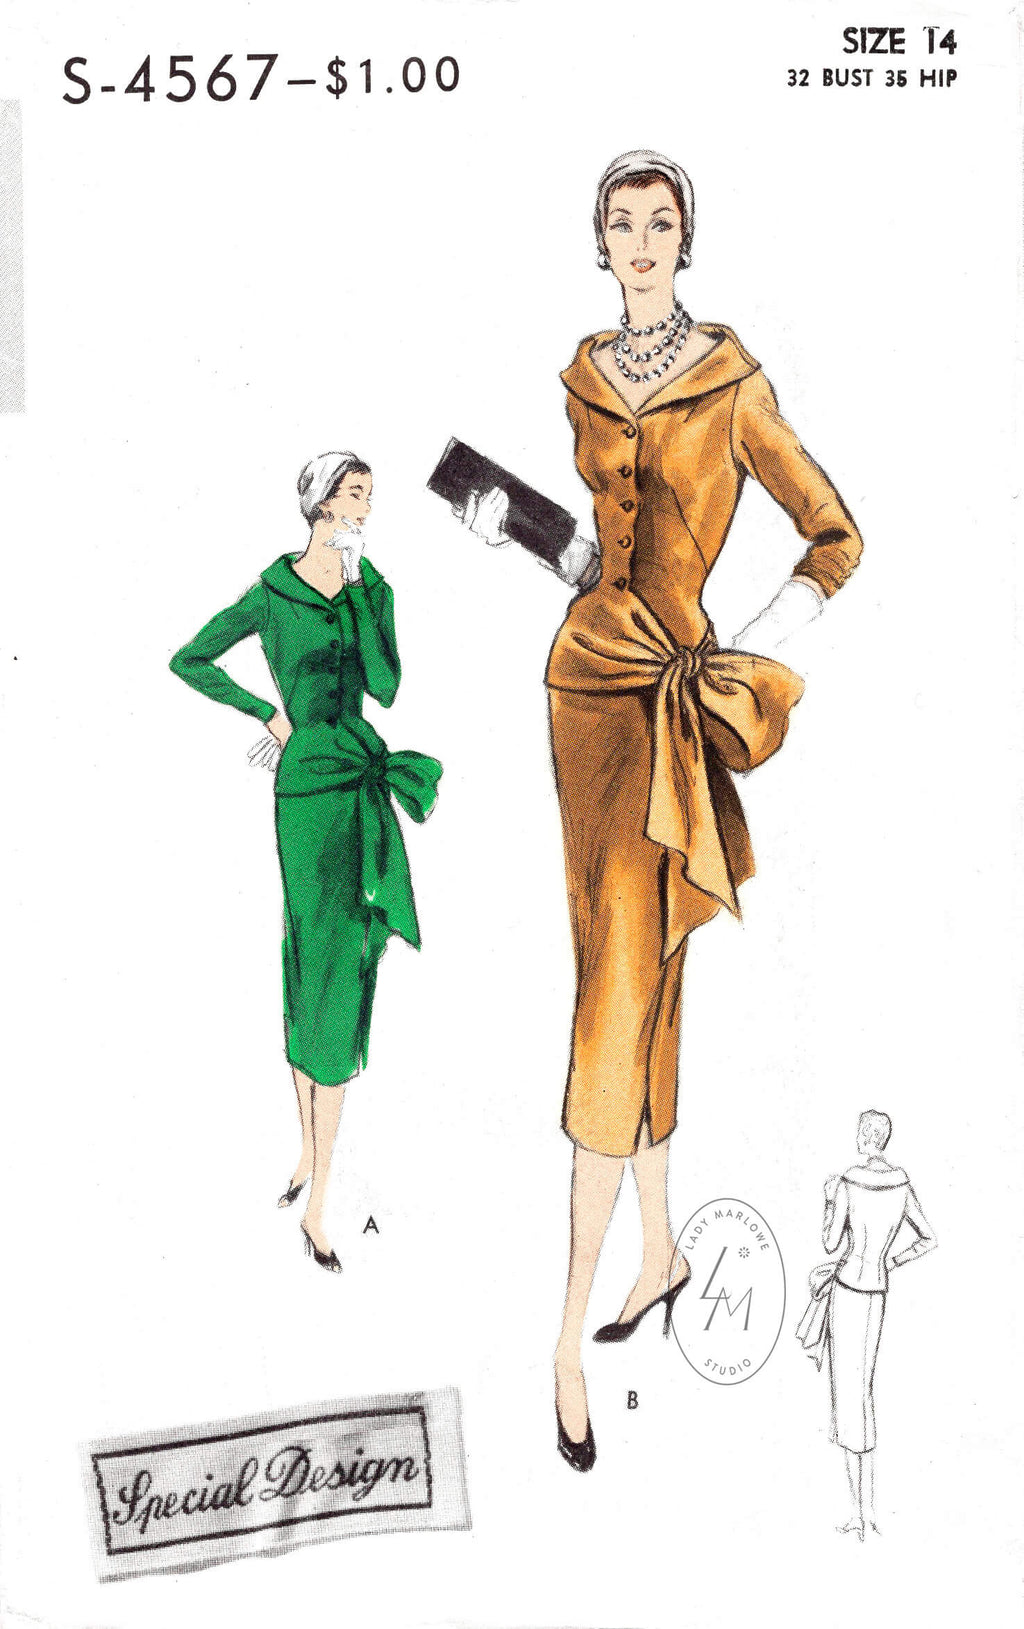 1950s dress vintage sewing pattern reproduction wiggle skirt draped side sash bow Vogue S-4567